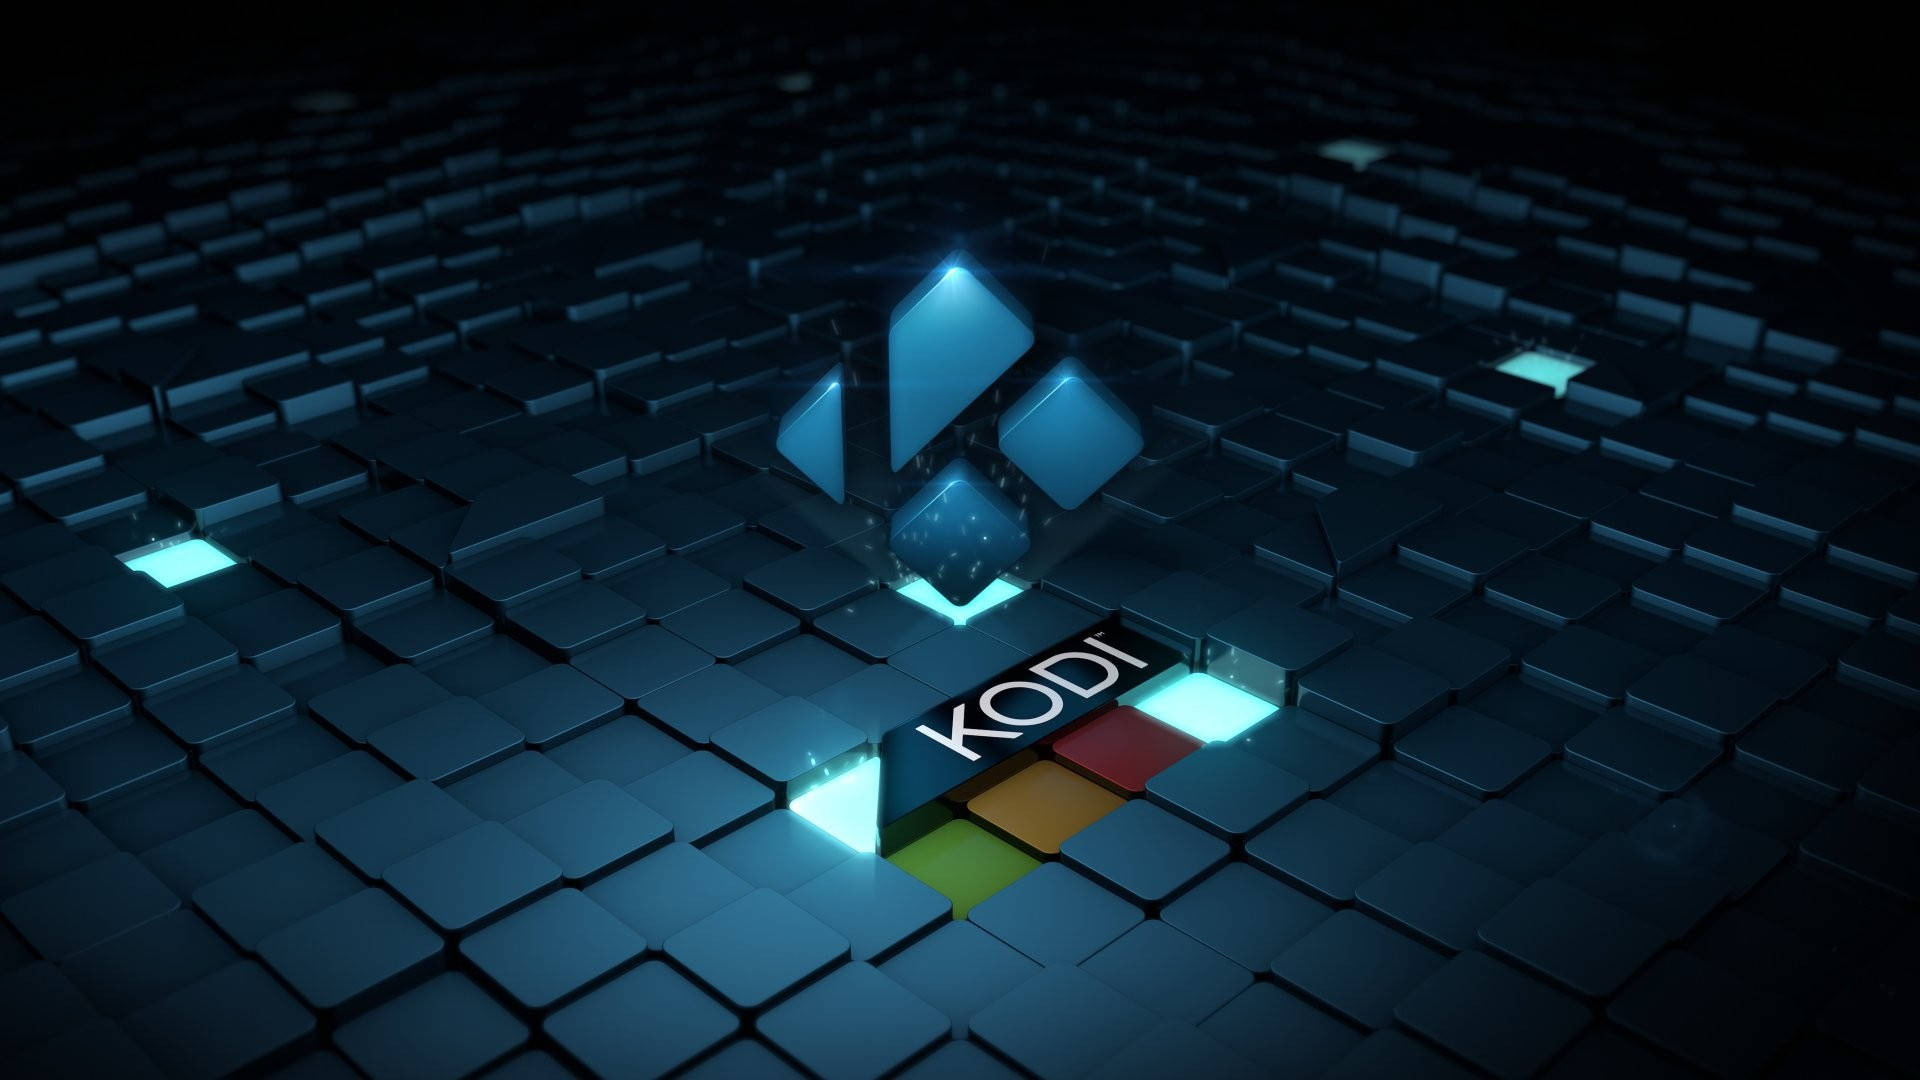 Kodi might drop its next Xbox release if it doesn't find new Windows  developers - Neowin